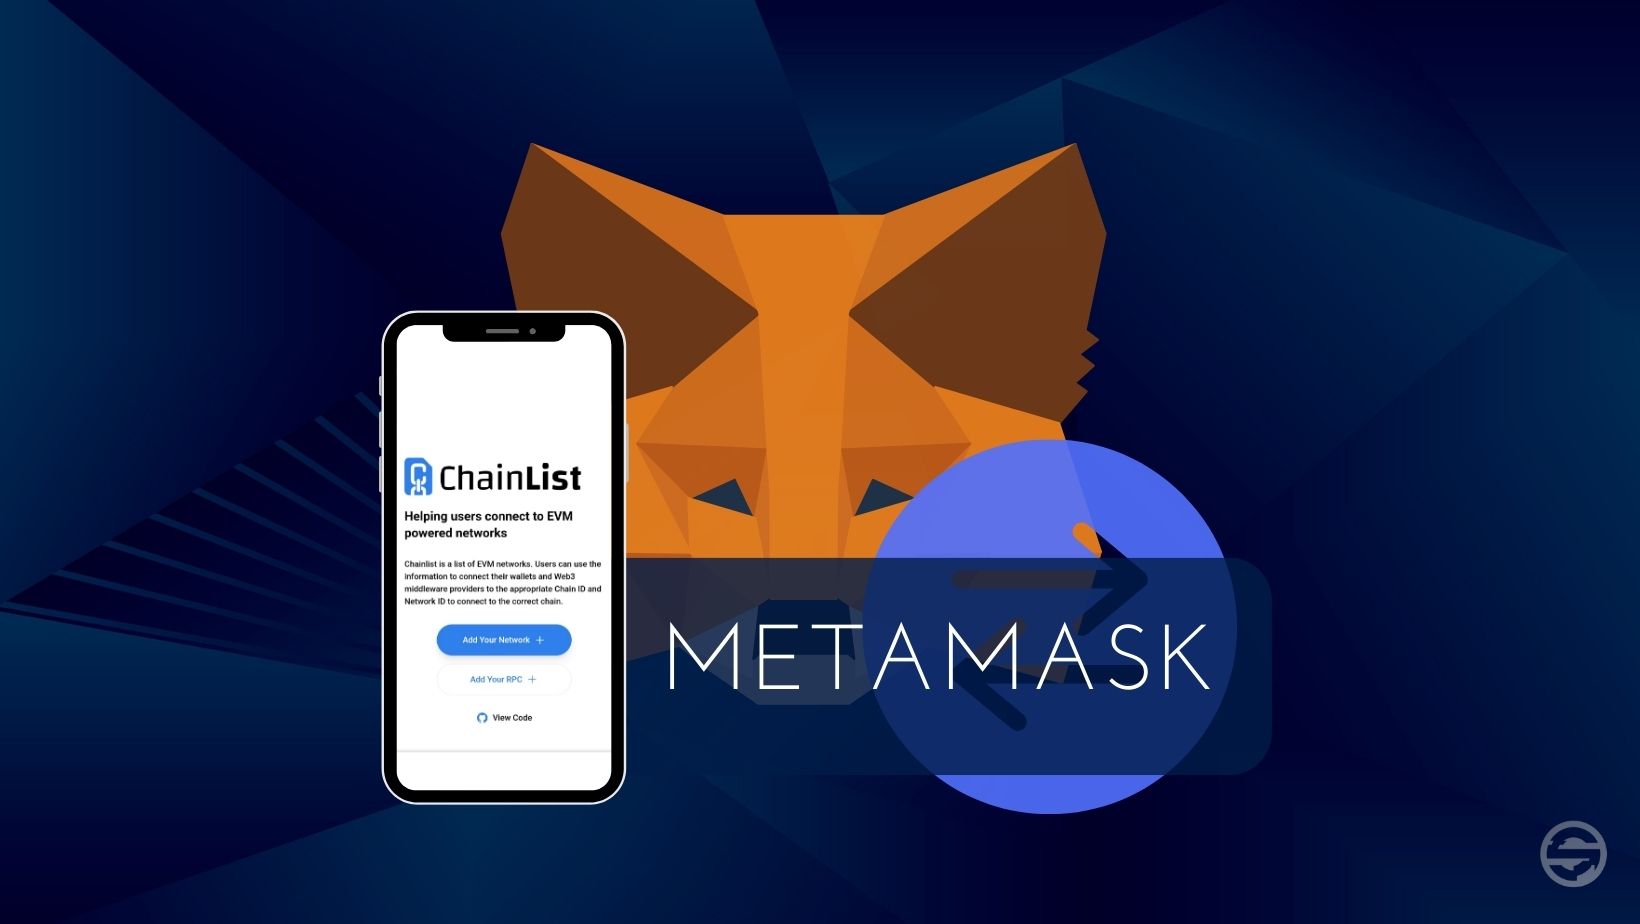 How to add a network to Metamask?